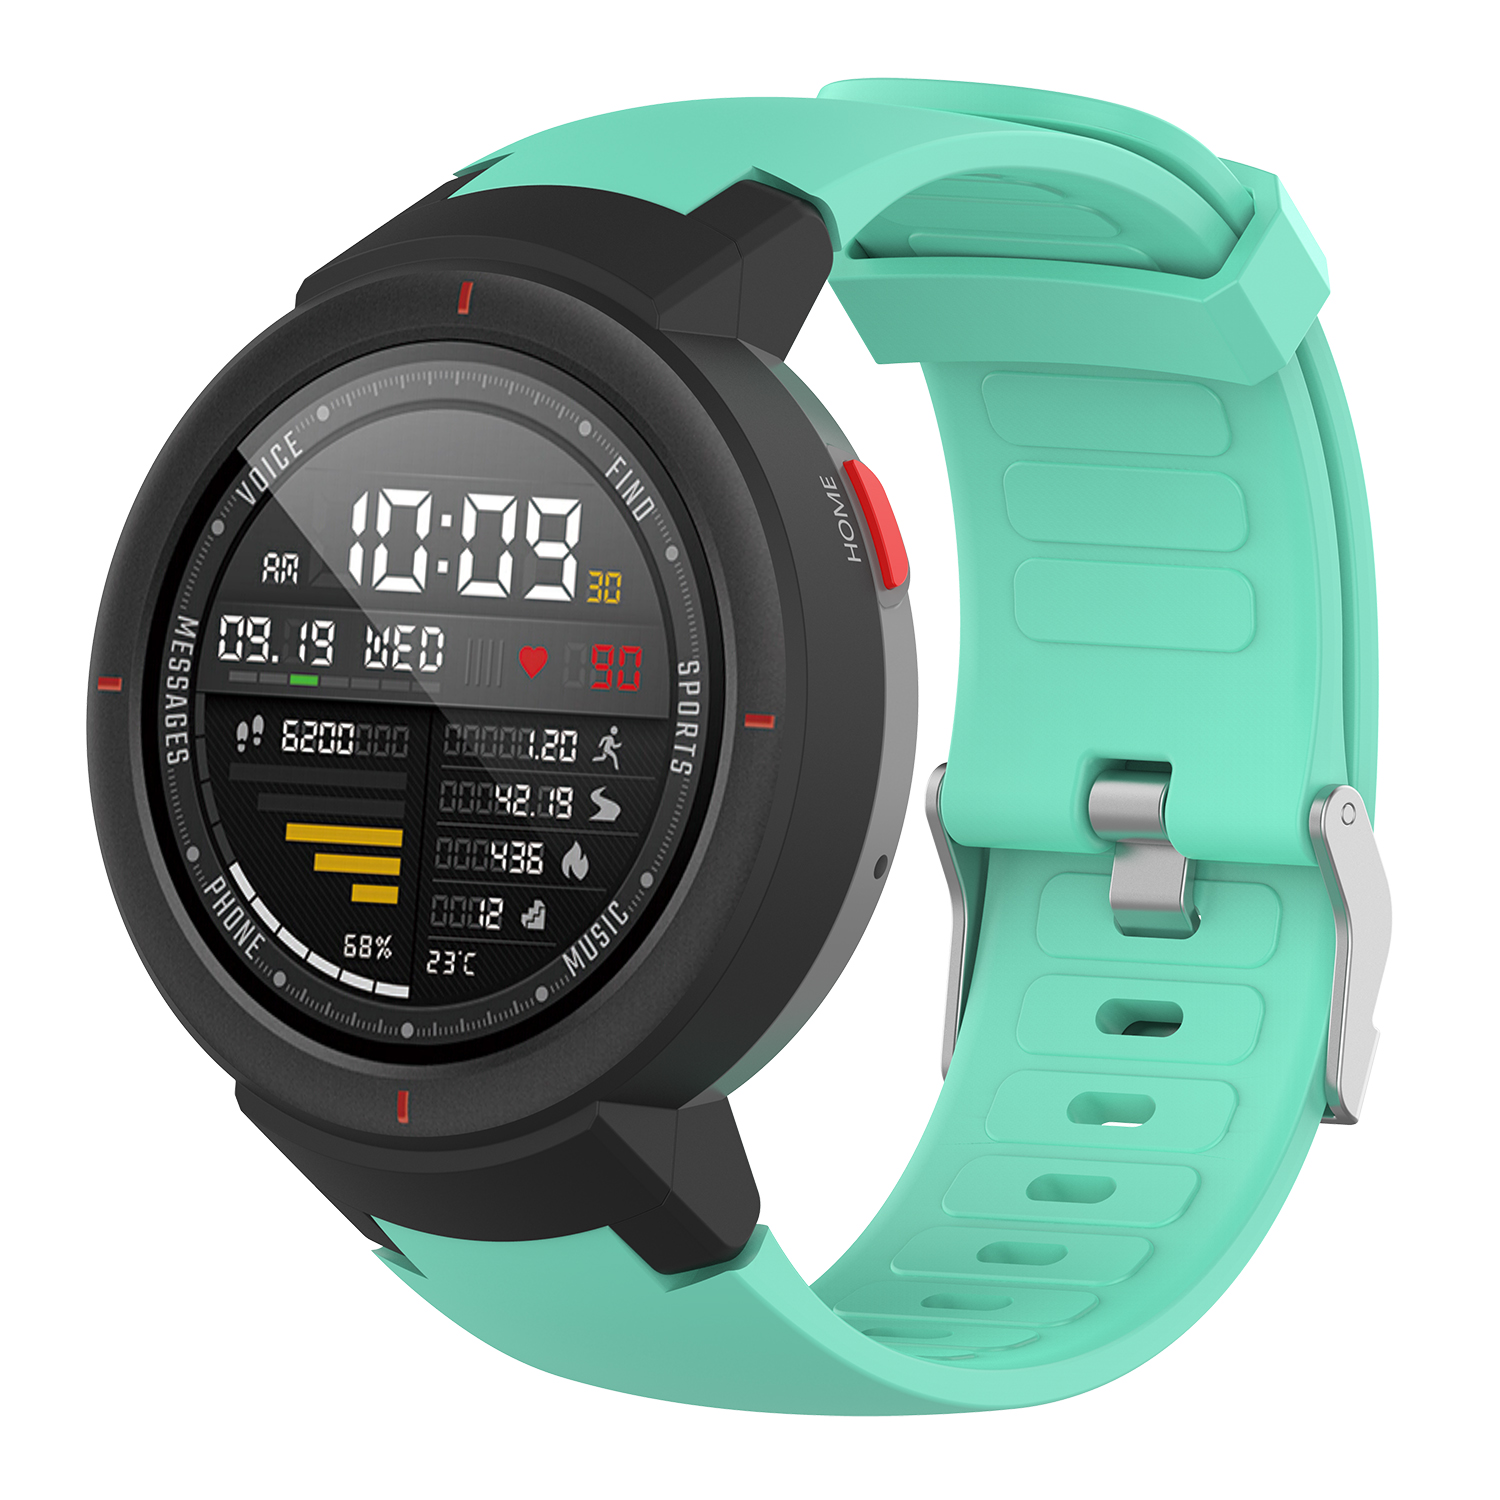 Bakeey-22mm-Multi-color-Silicone-Replacement-Strap-Smart-Watch-Band-For-Amazfit-Verge-1739374-20